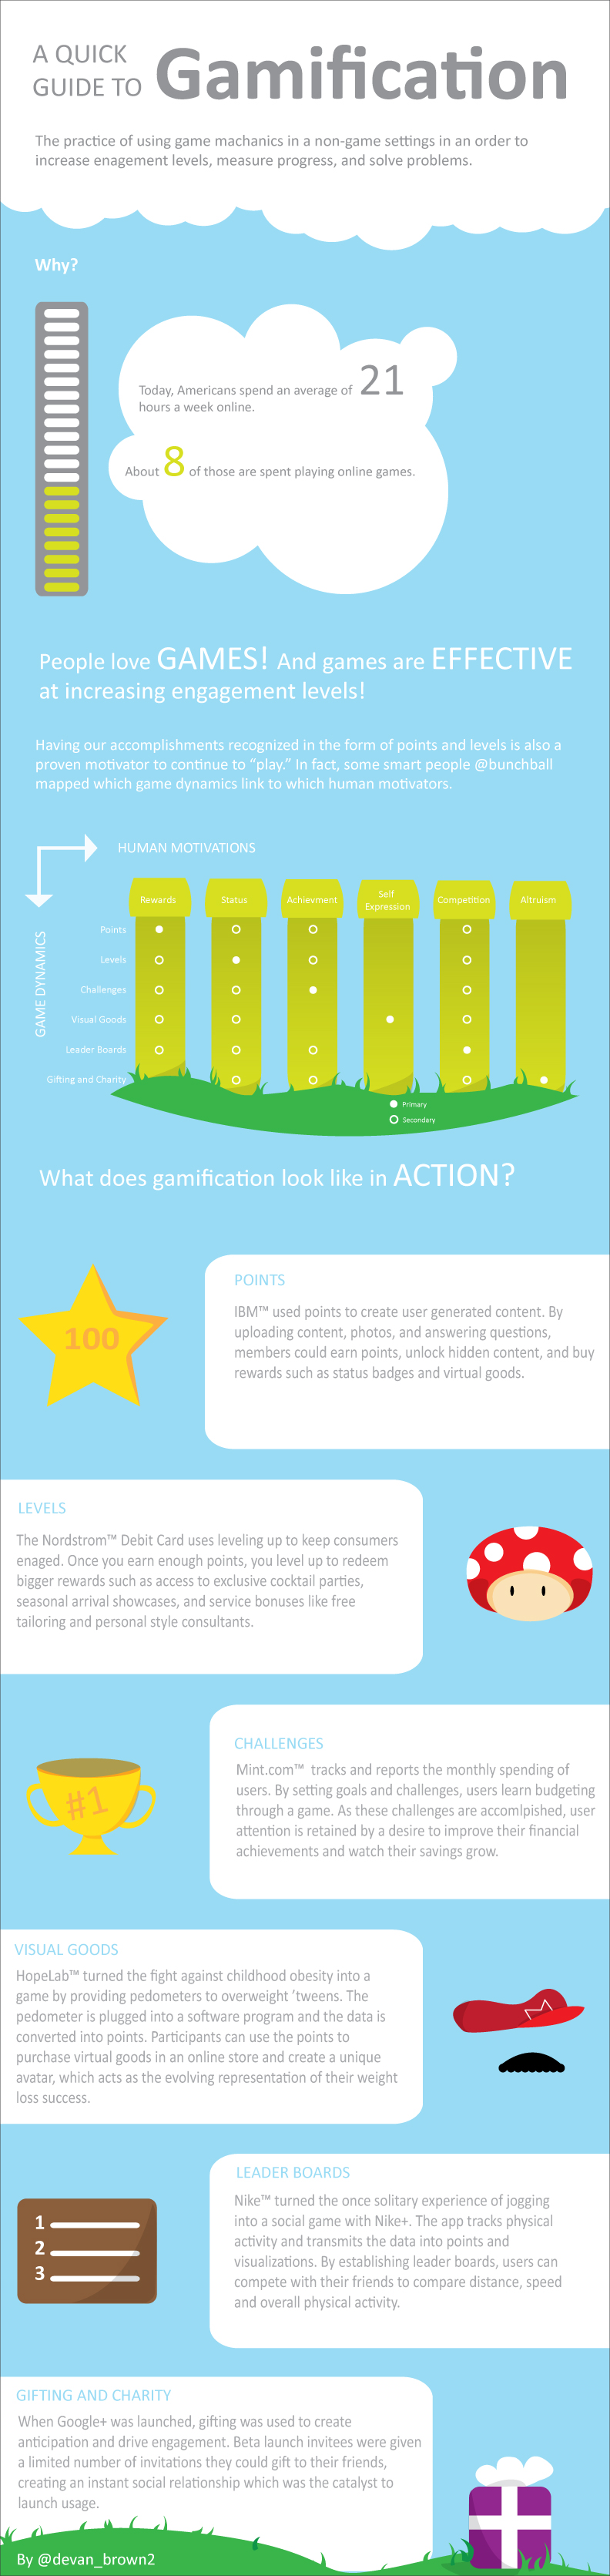 A gamification infographic by Devan Brown @devan_brown2